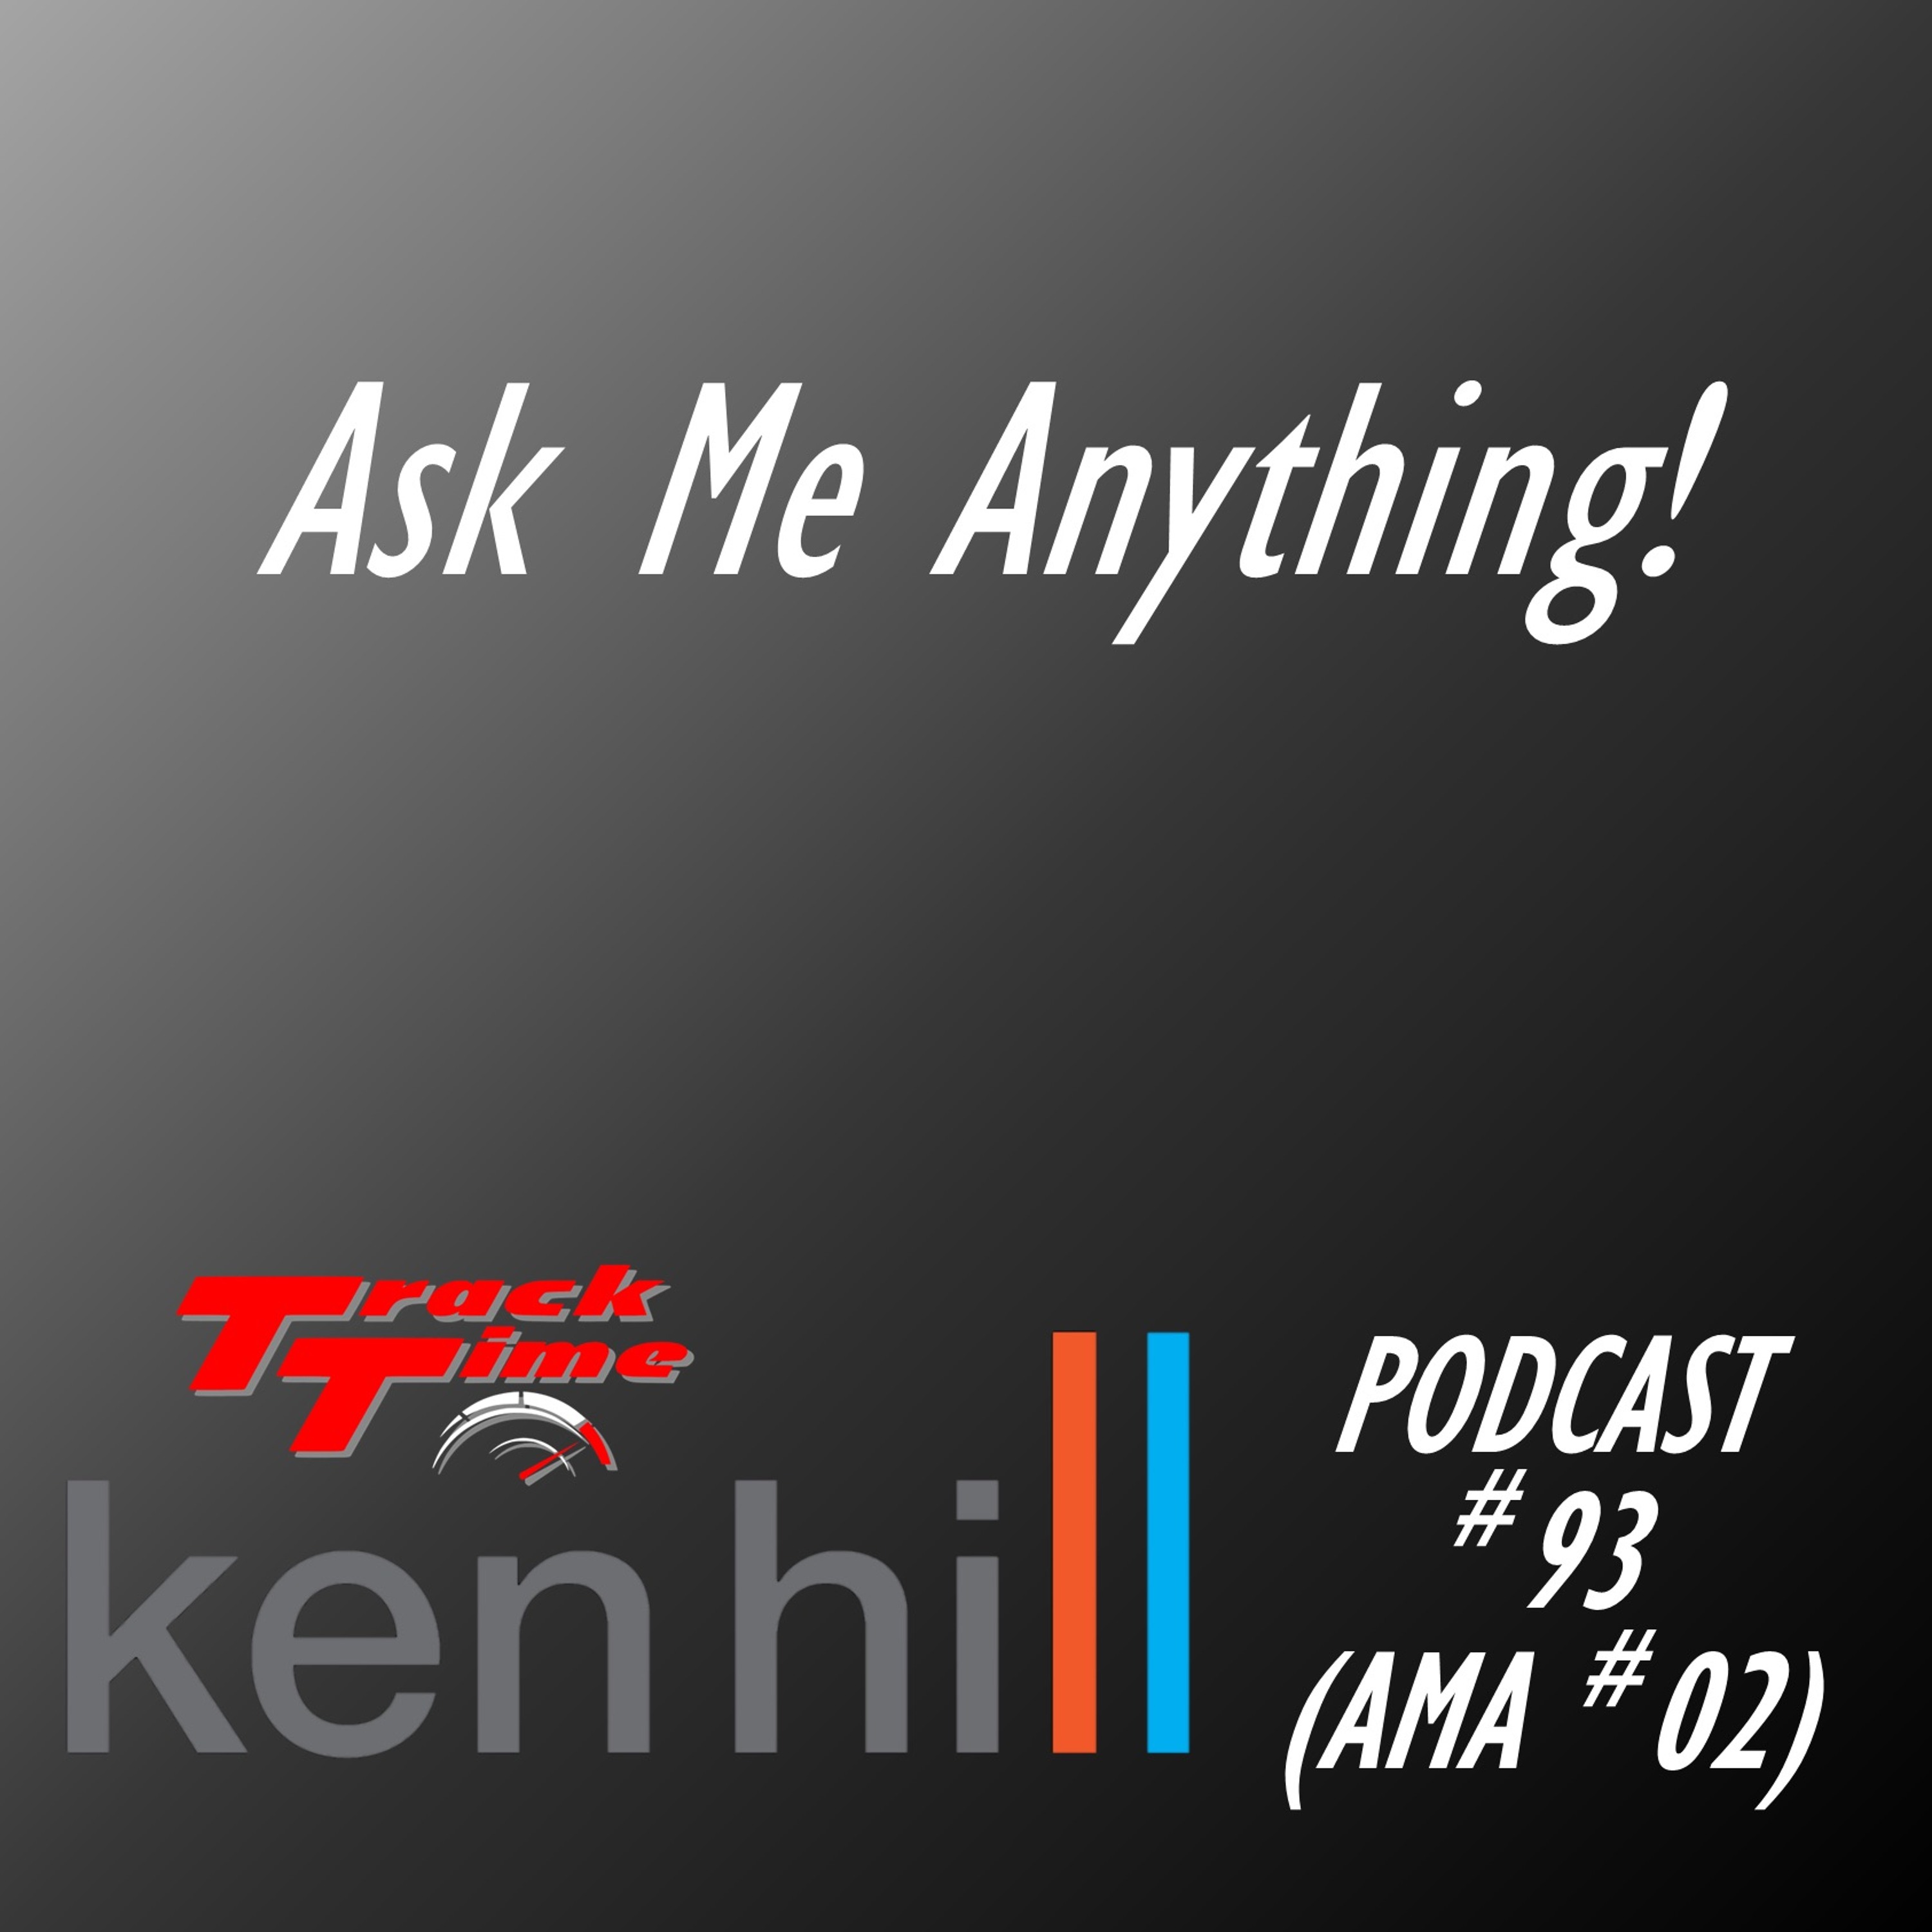 Podcast # 93 - Ask Me Anything #2 (Your questions answered!)